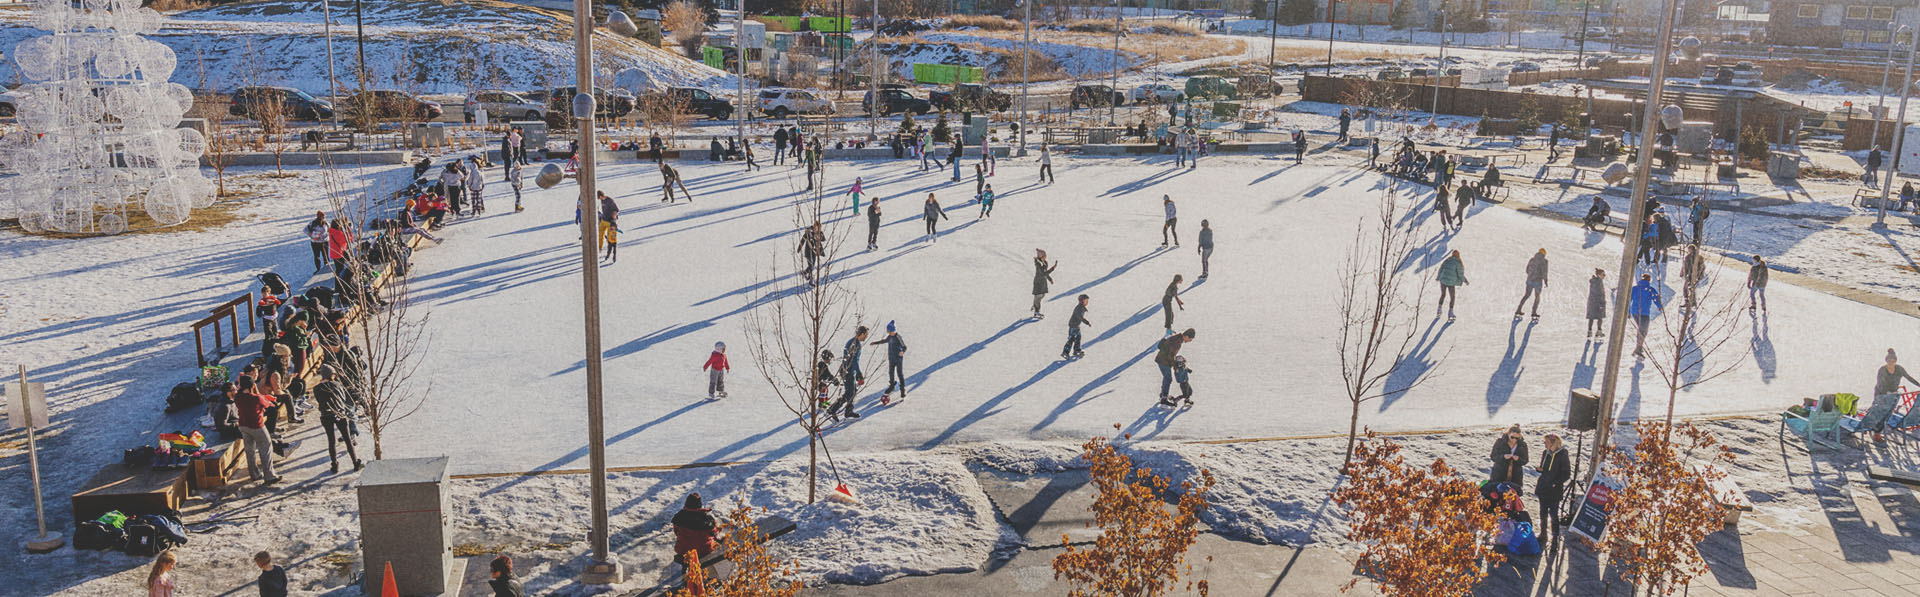 people outdoor ice skating at Central Commons Park in University District